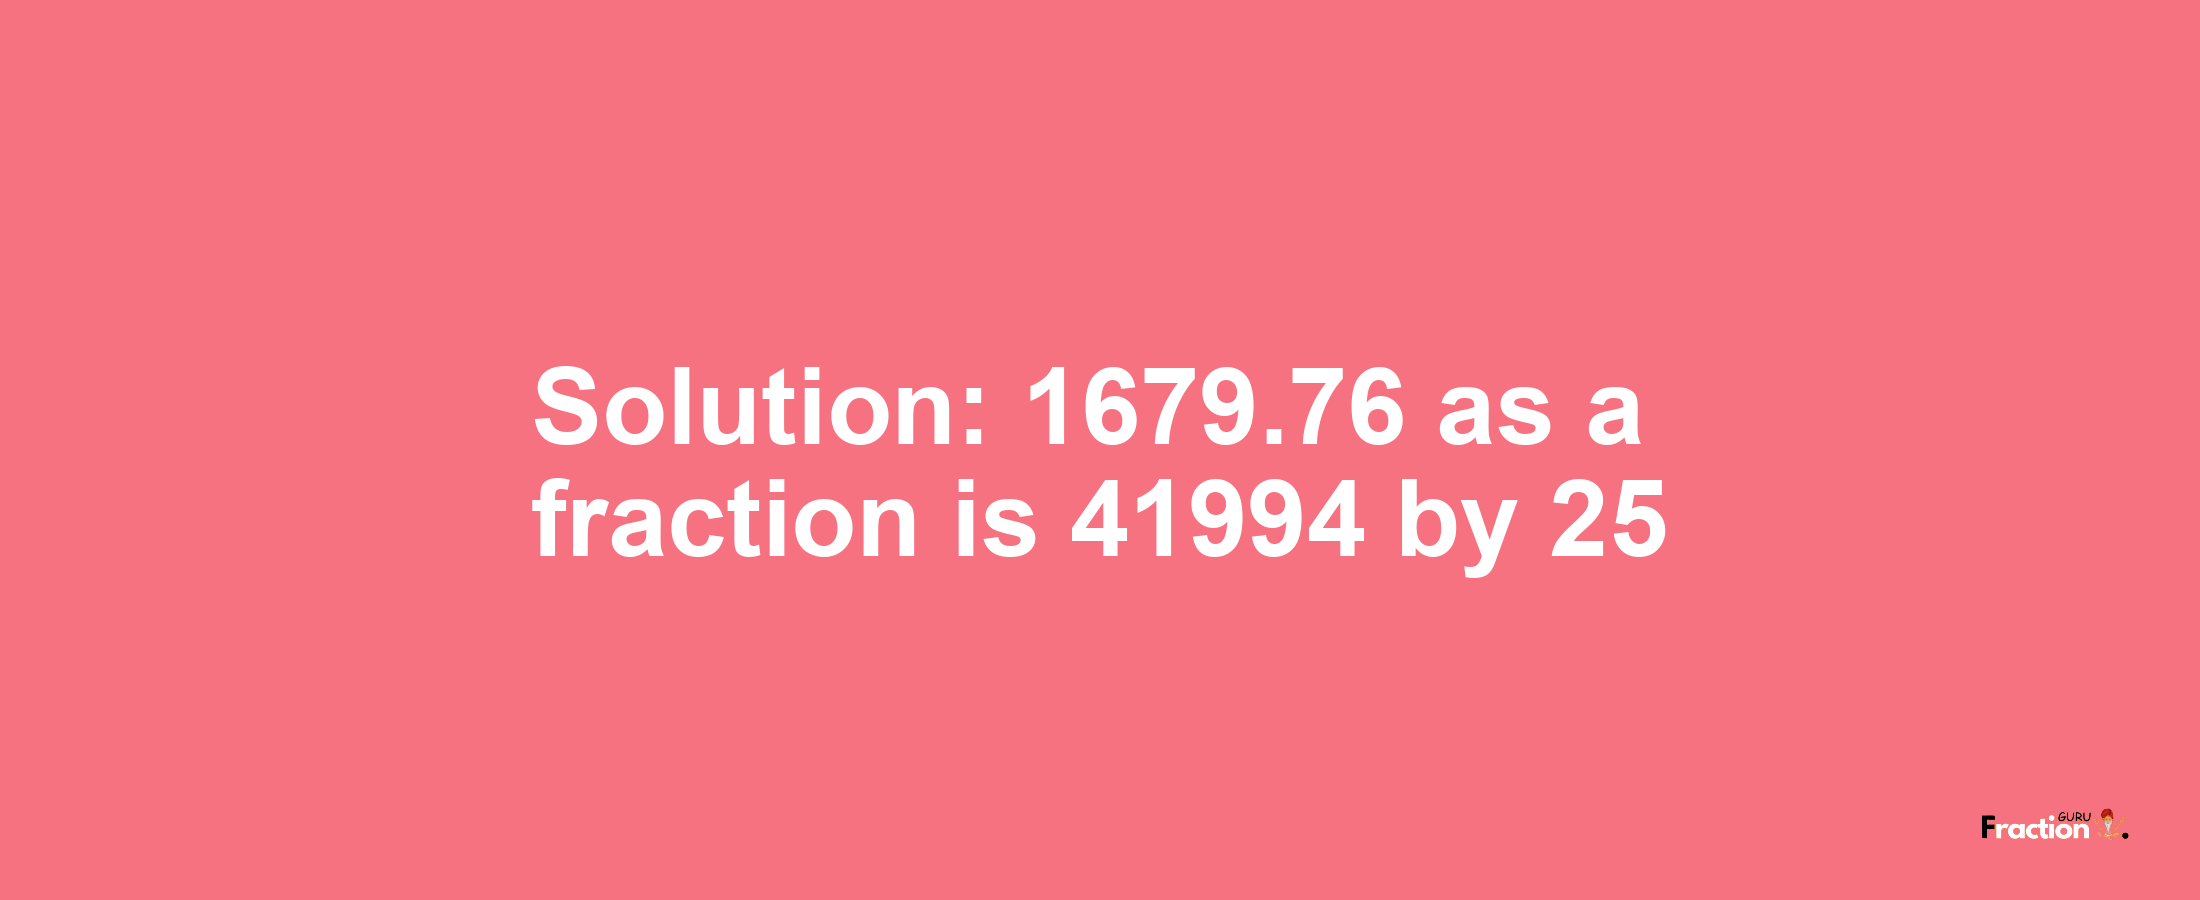 Solution:1679.76 as a fraction is 41994/25